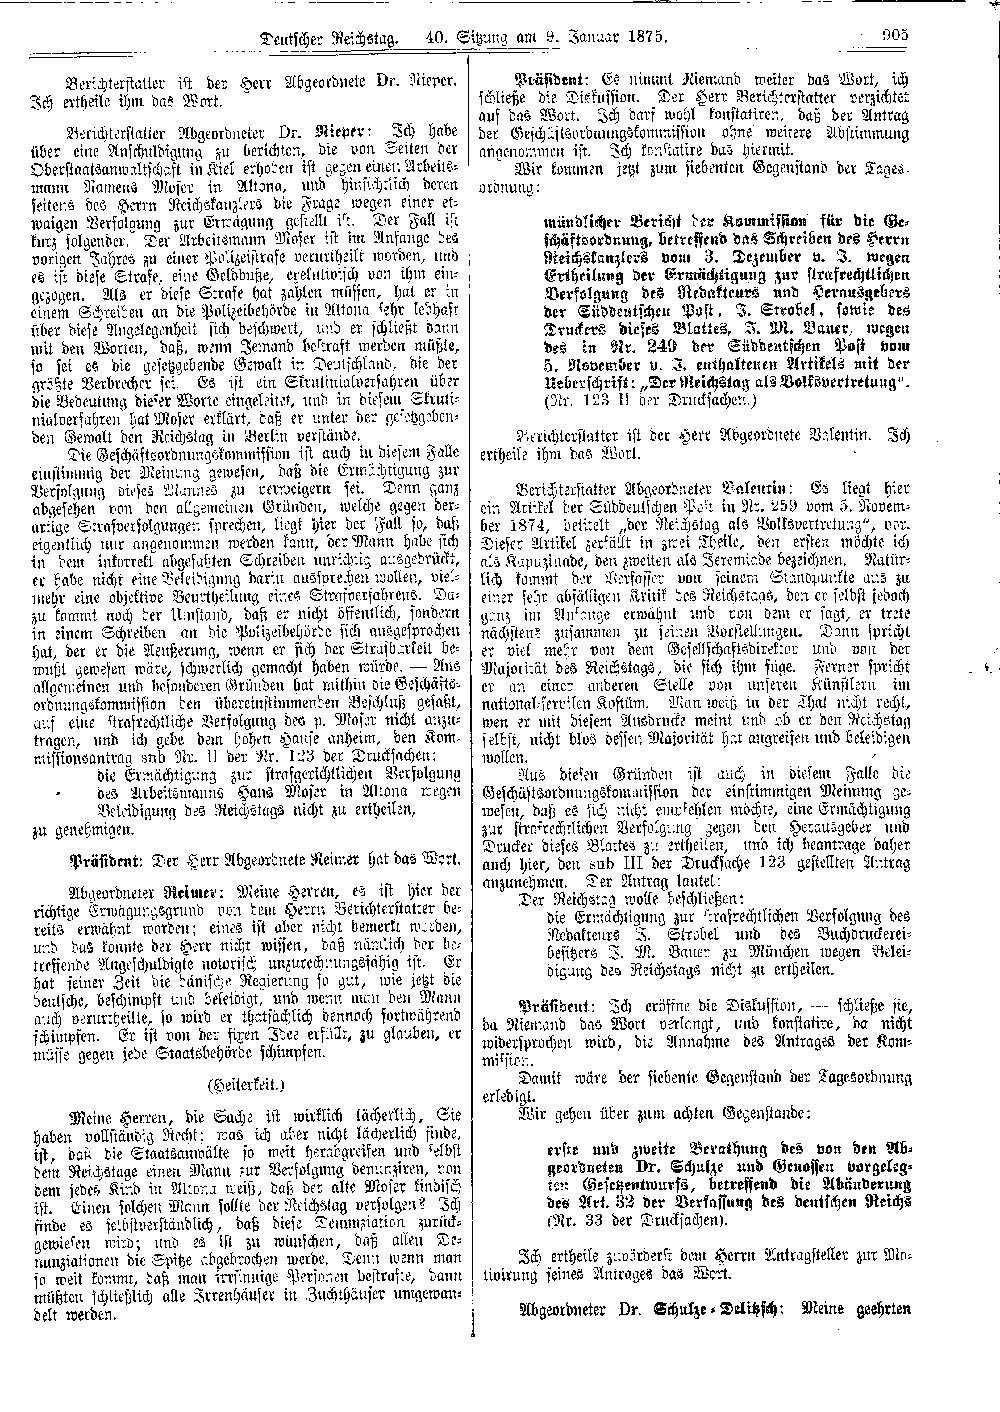 Scan of page 905